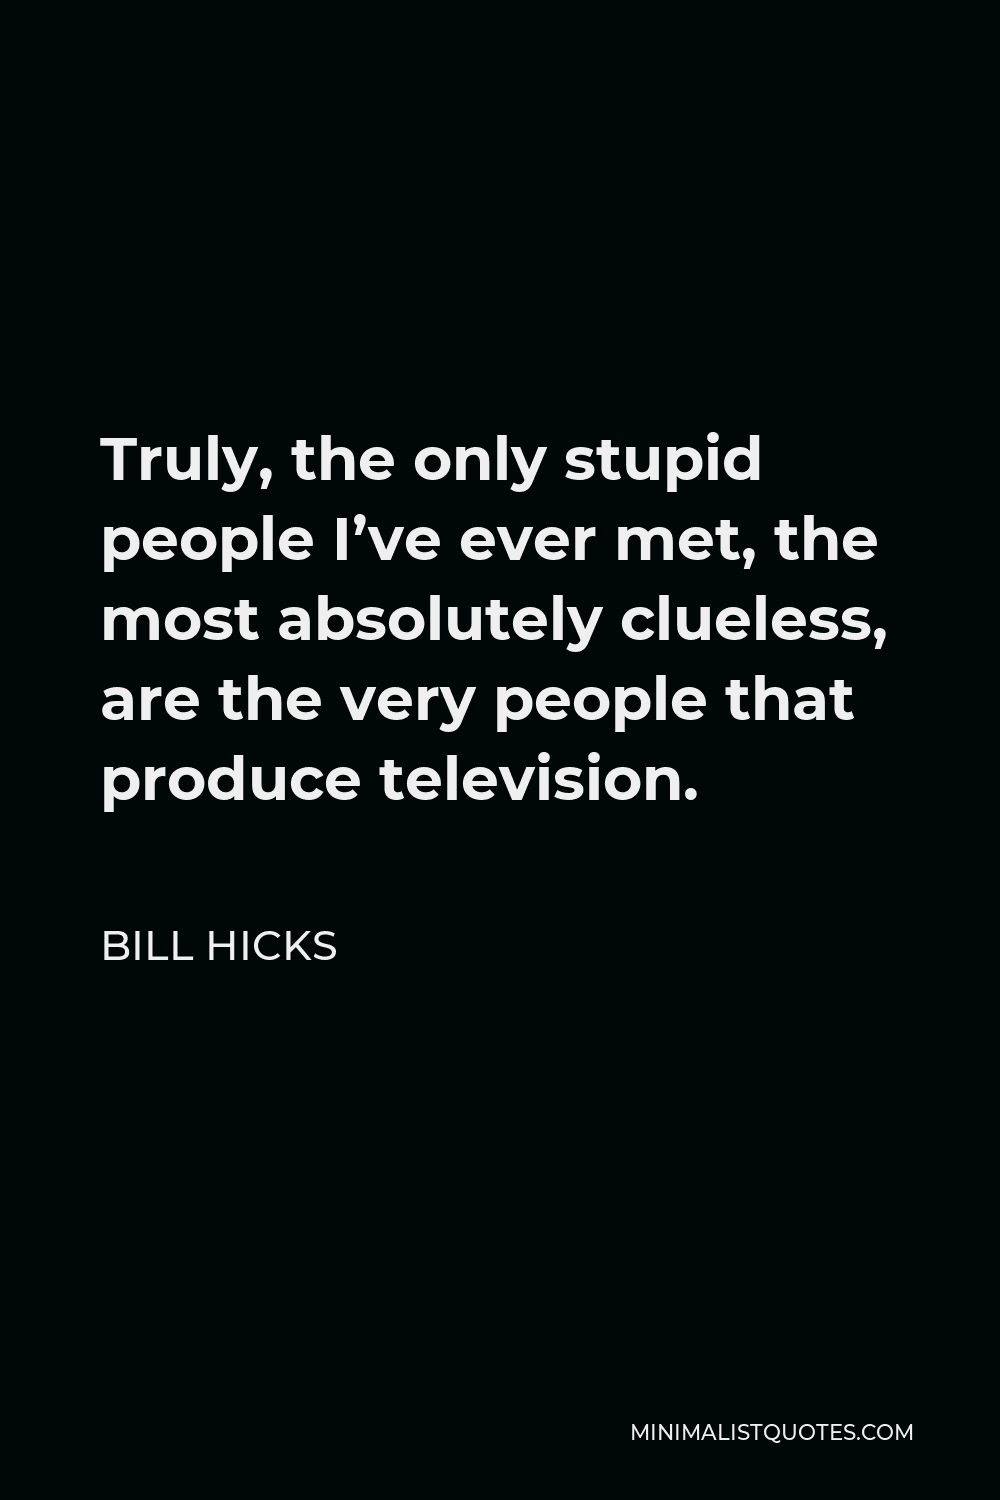 Bill Hicks Quote - Truly, the only stupid people I’ve ever met, the most absolutely clueless, are the very people that produce television.